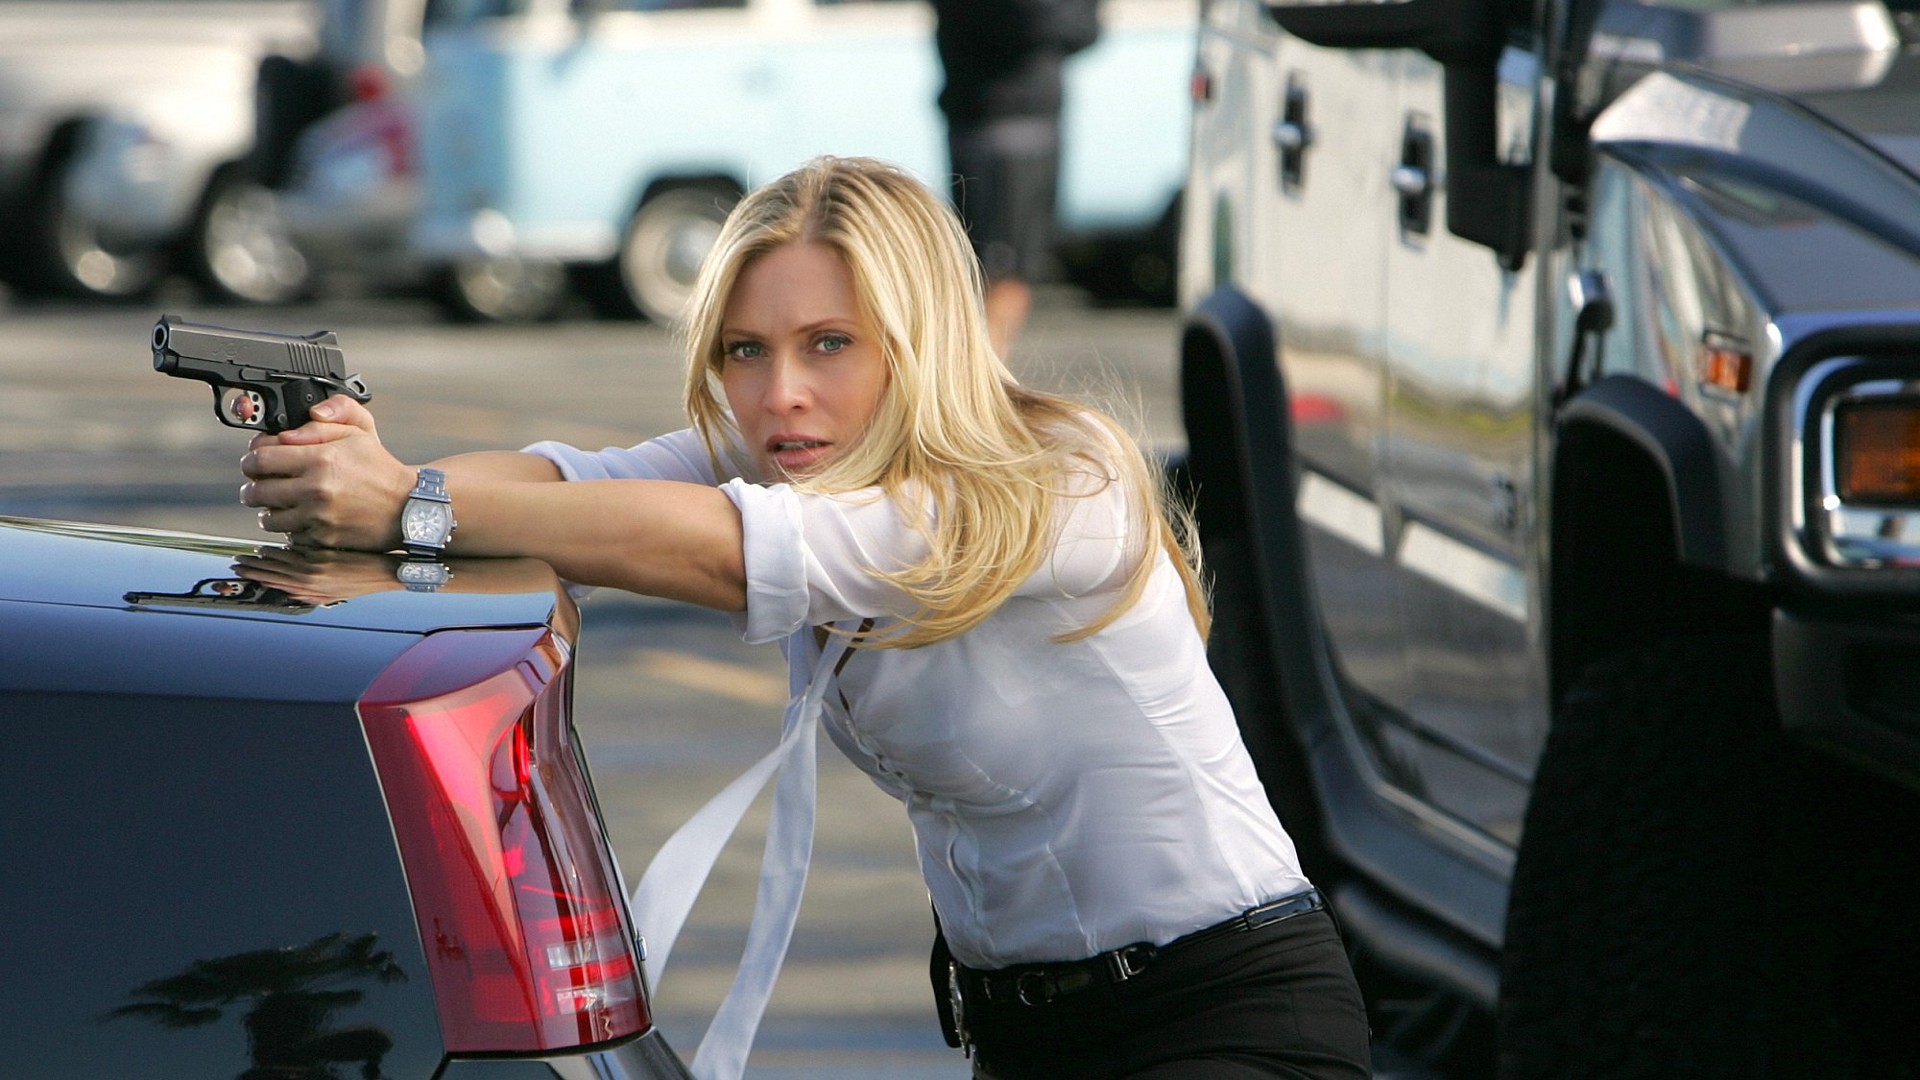 Emily Procter Wallpapers